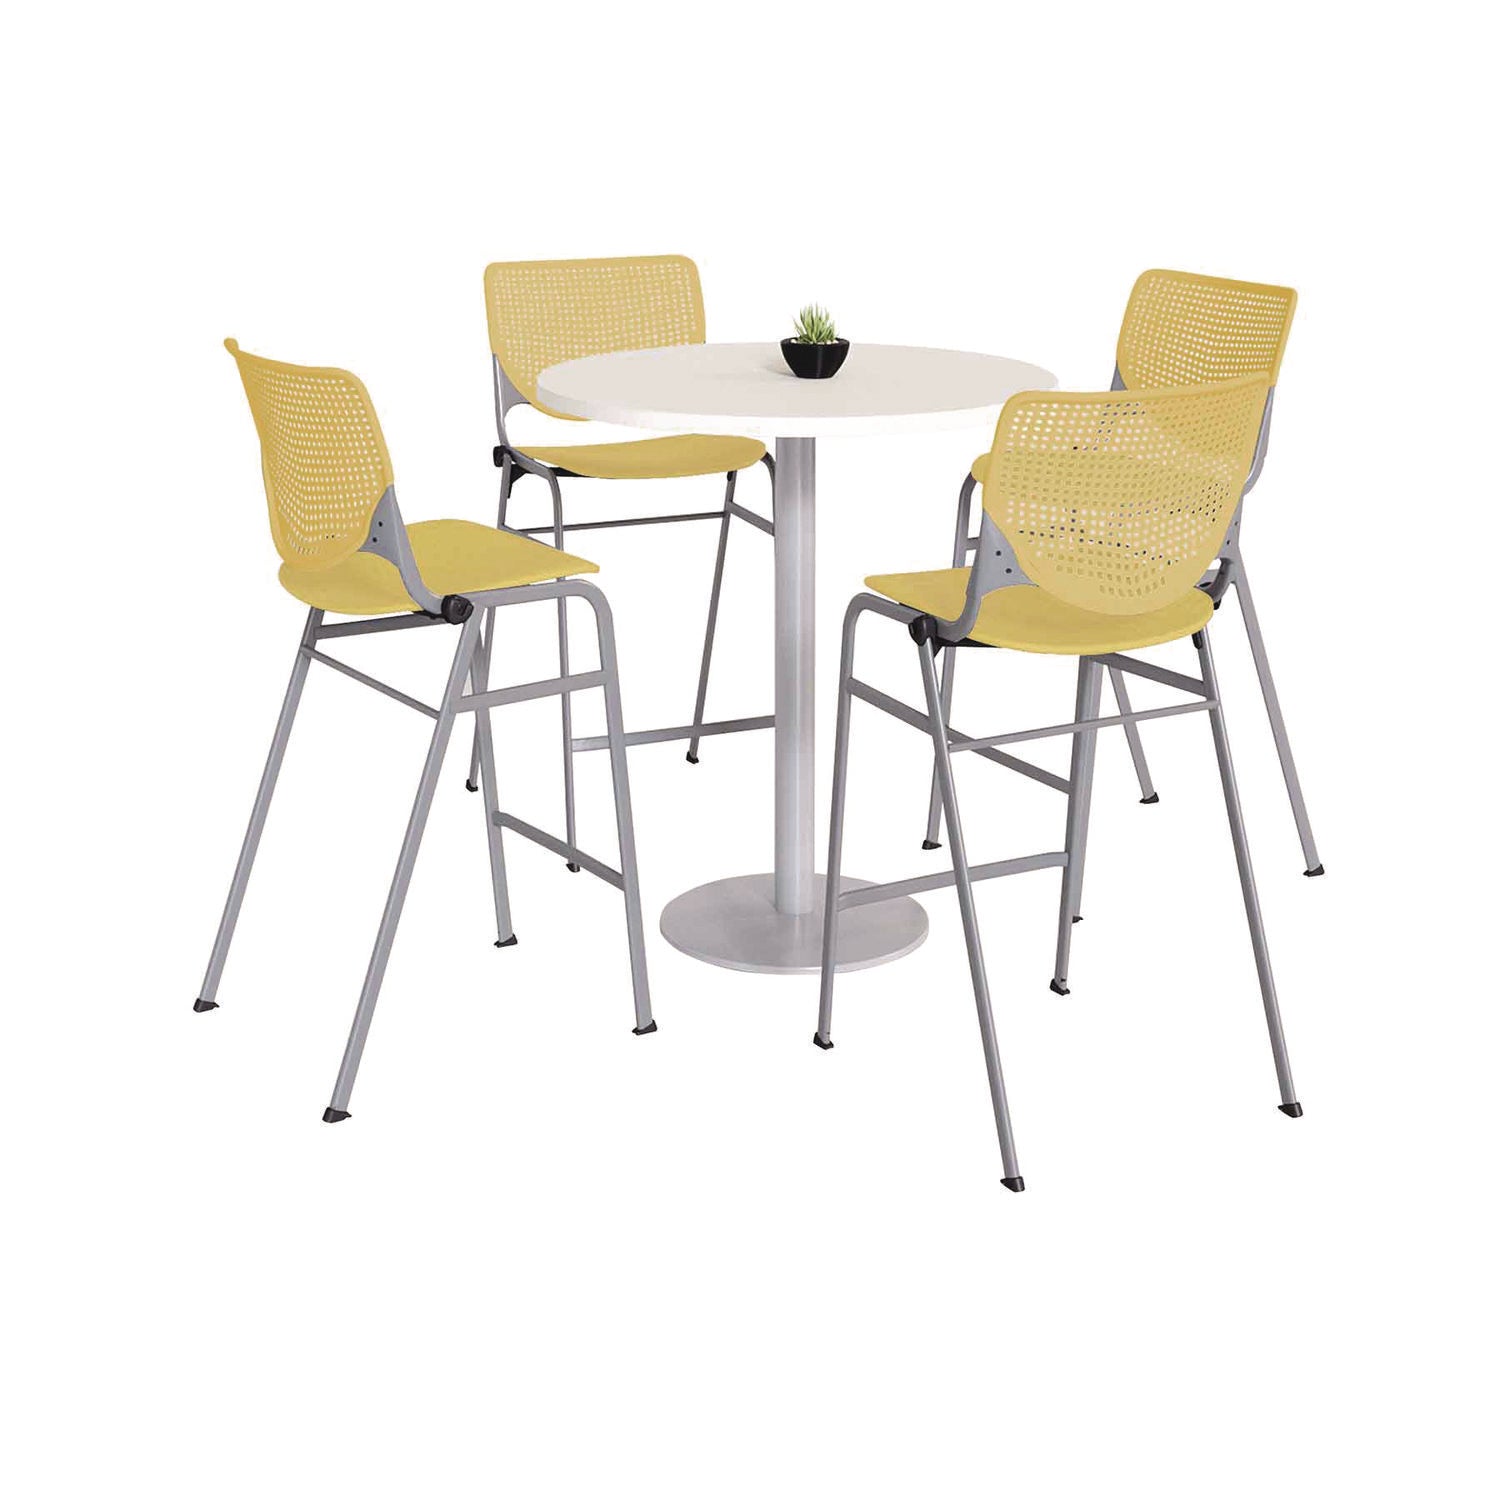 pedestal-bistro-table-with-four-yellow-kool-series-barstools-round-36dia-x-41h-designer-white-ships-in-4-6-business-days_kfi811774037099 - 1